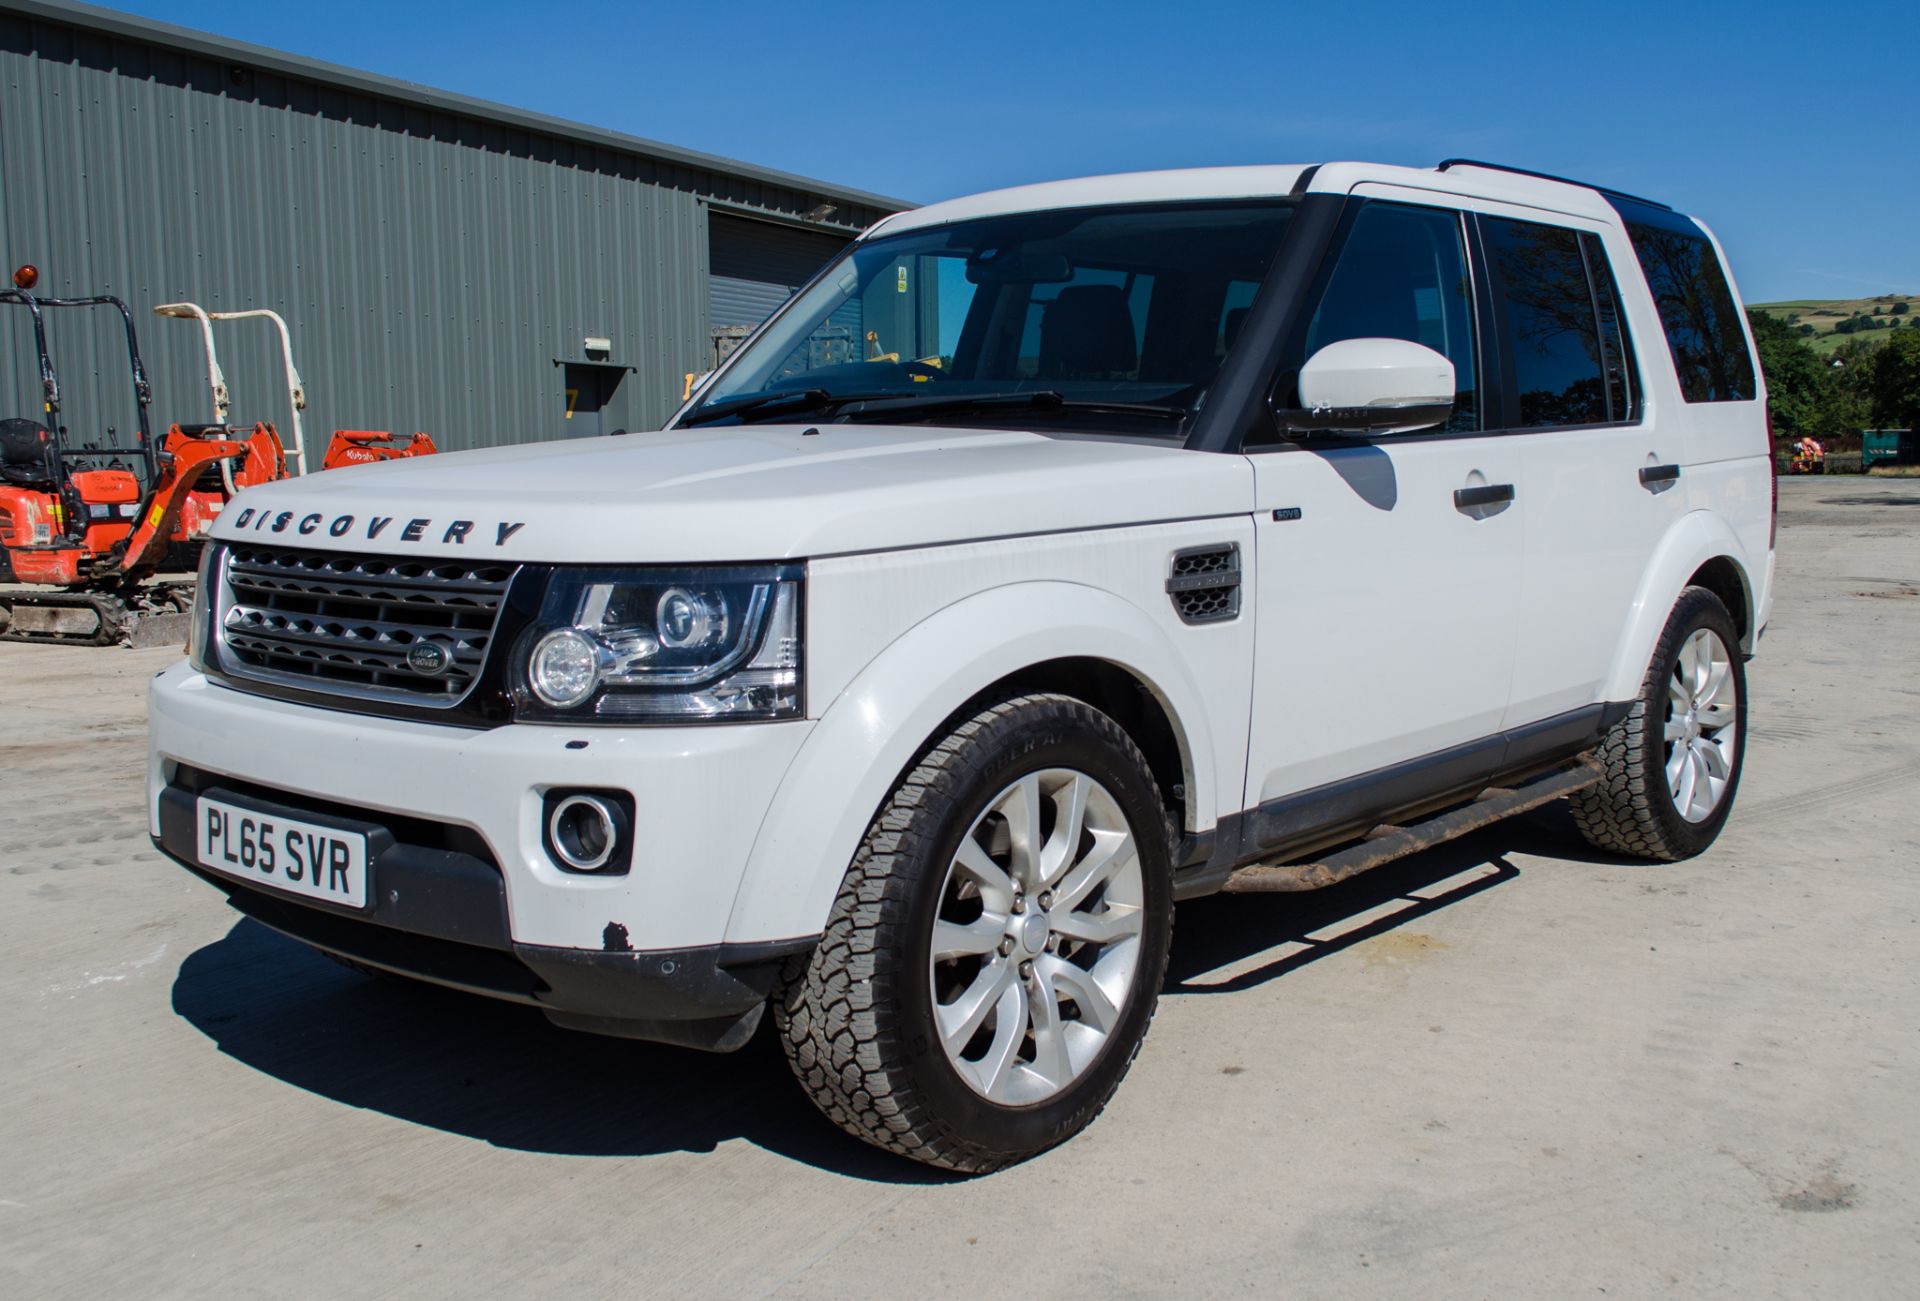 Land Rover Discovery 4 3.0 SE SDV6 Commercial 4x4 utility vehicle Reg No: PL65 SVR Date of